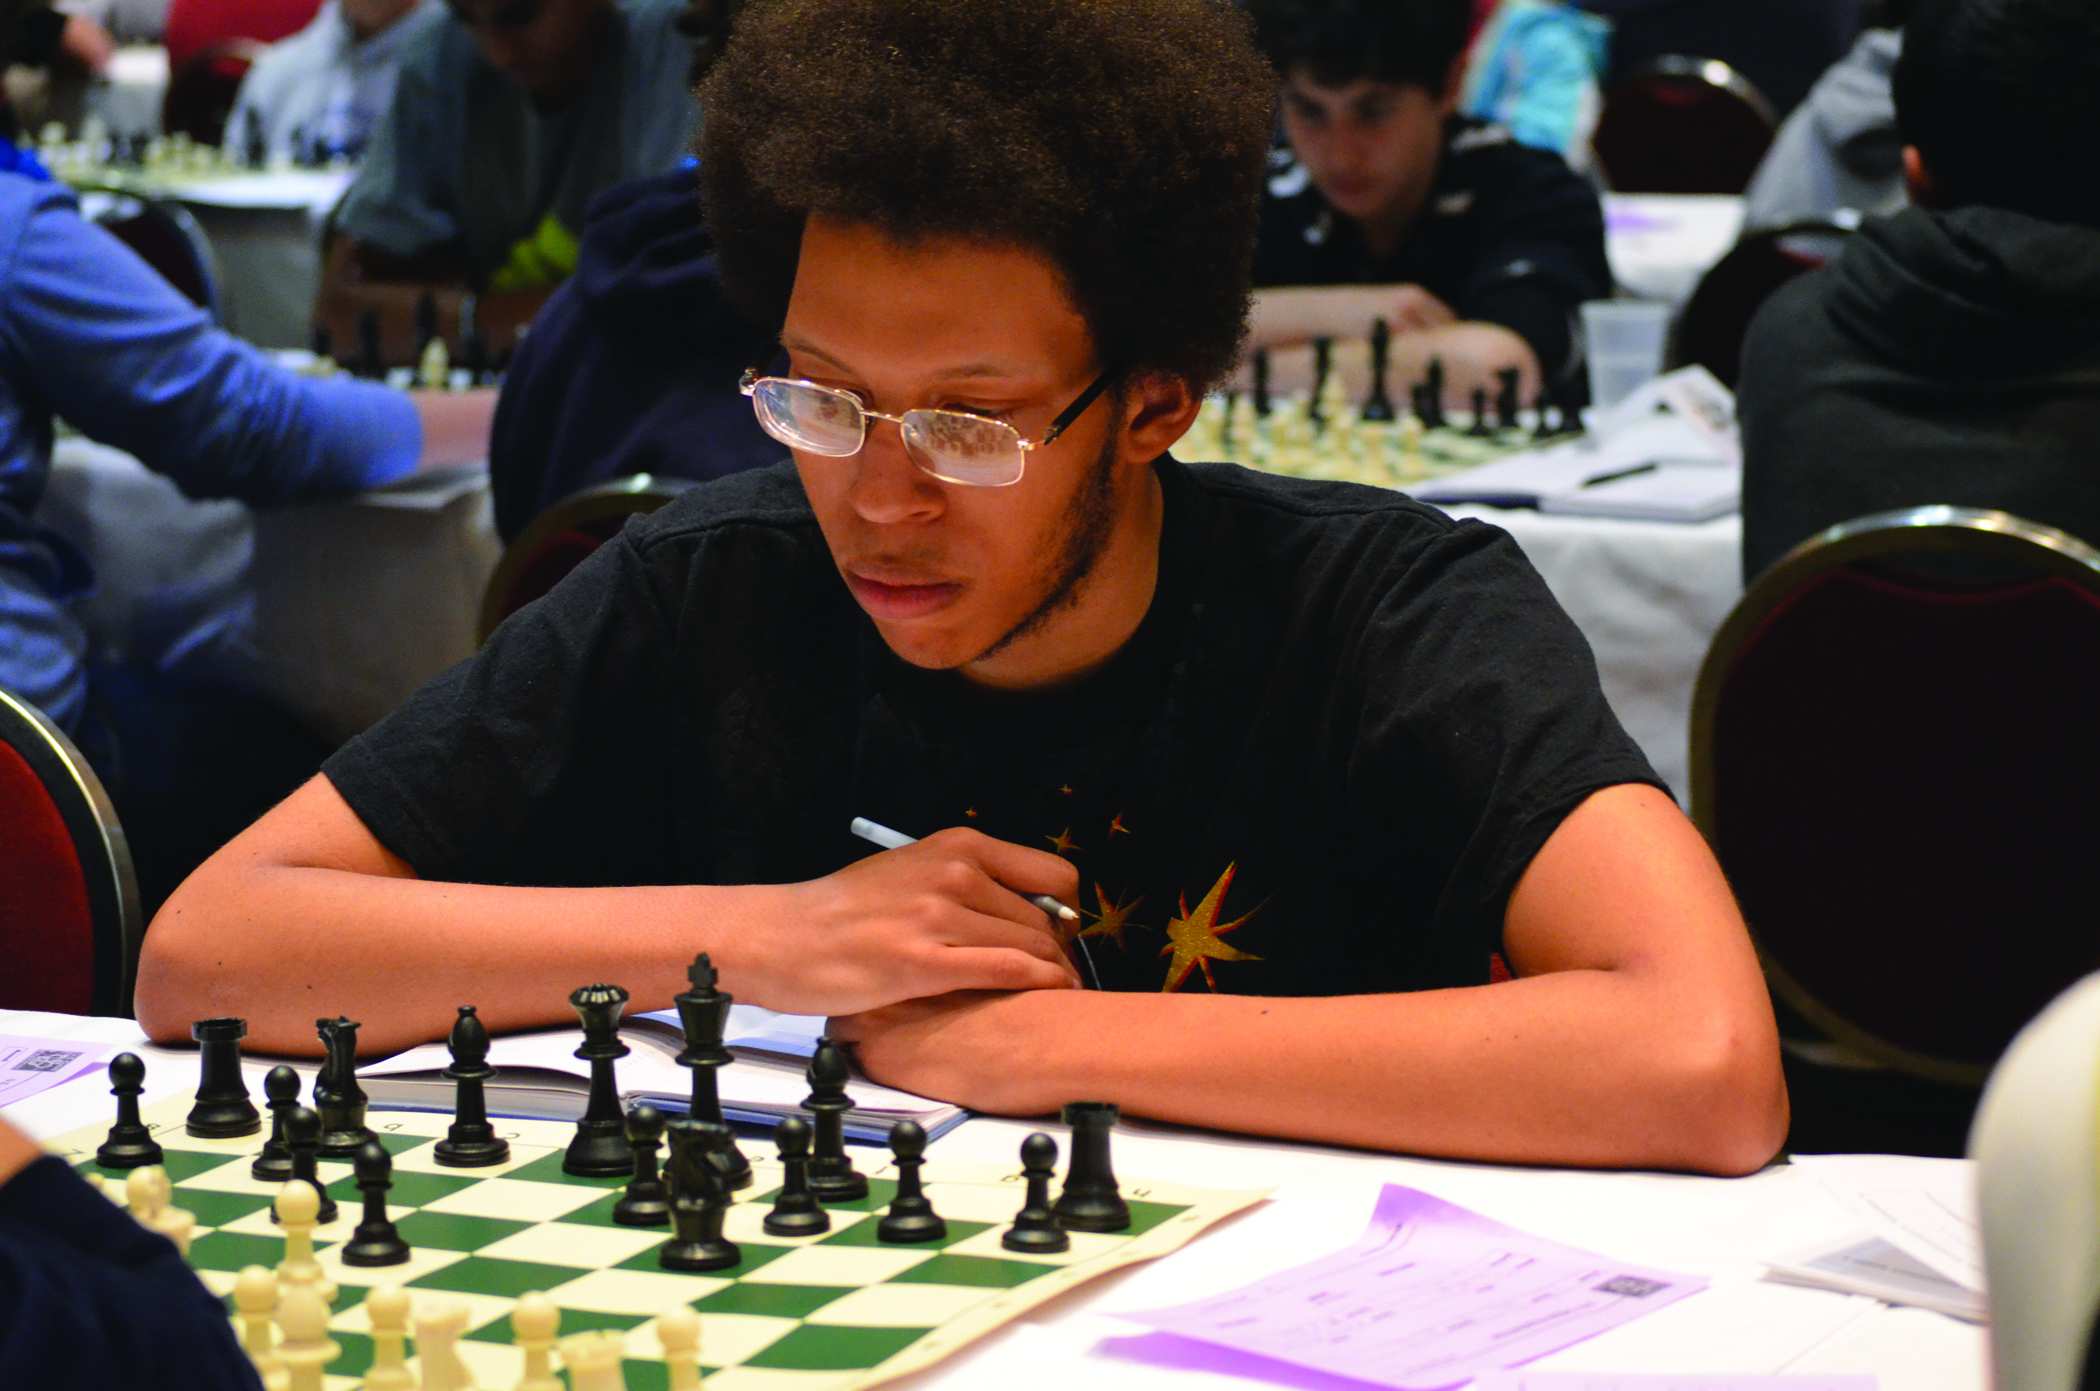 Eddie McBride, at the 2012 High School Nationals in Minneapolis, Minn., credits Evan Forster with helping him secure more college financial aid than he would have otherwise. McBride is now a student at Niagara University.